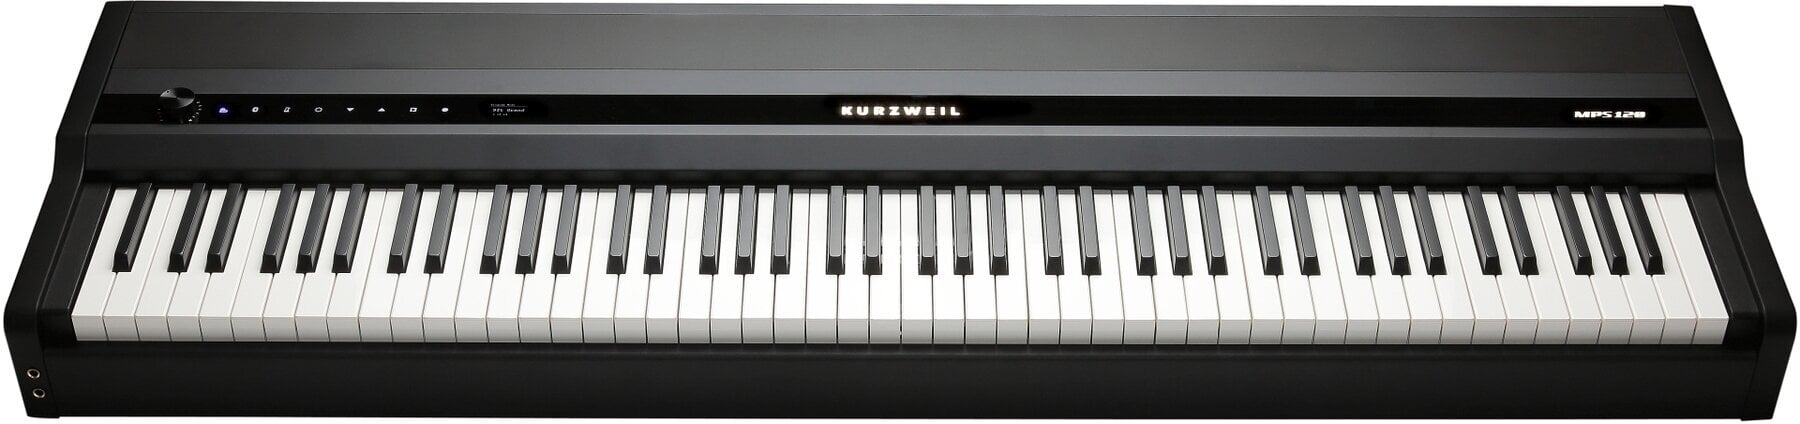 Digitaal stagepiano Kurzweil MPS120 LB Digitaal stagepiano